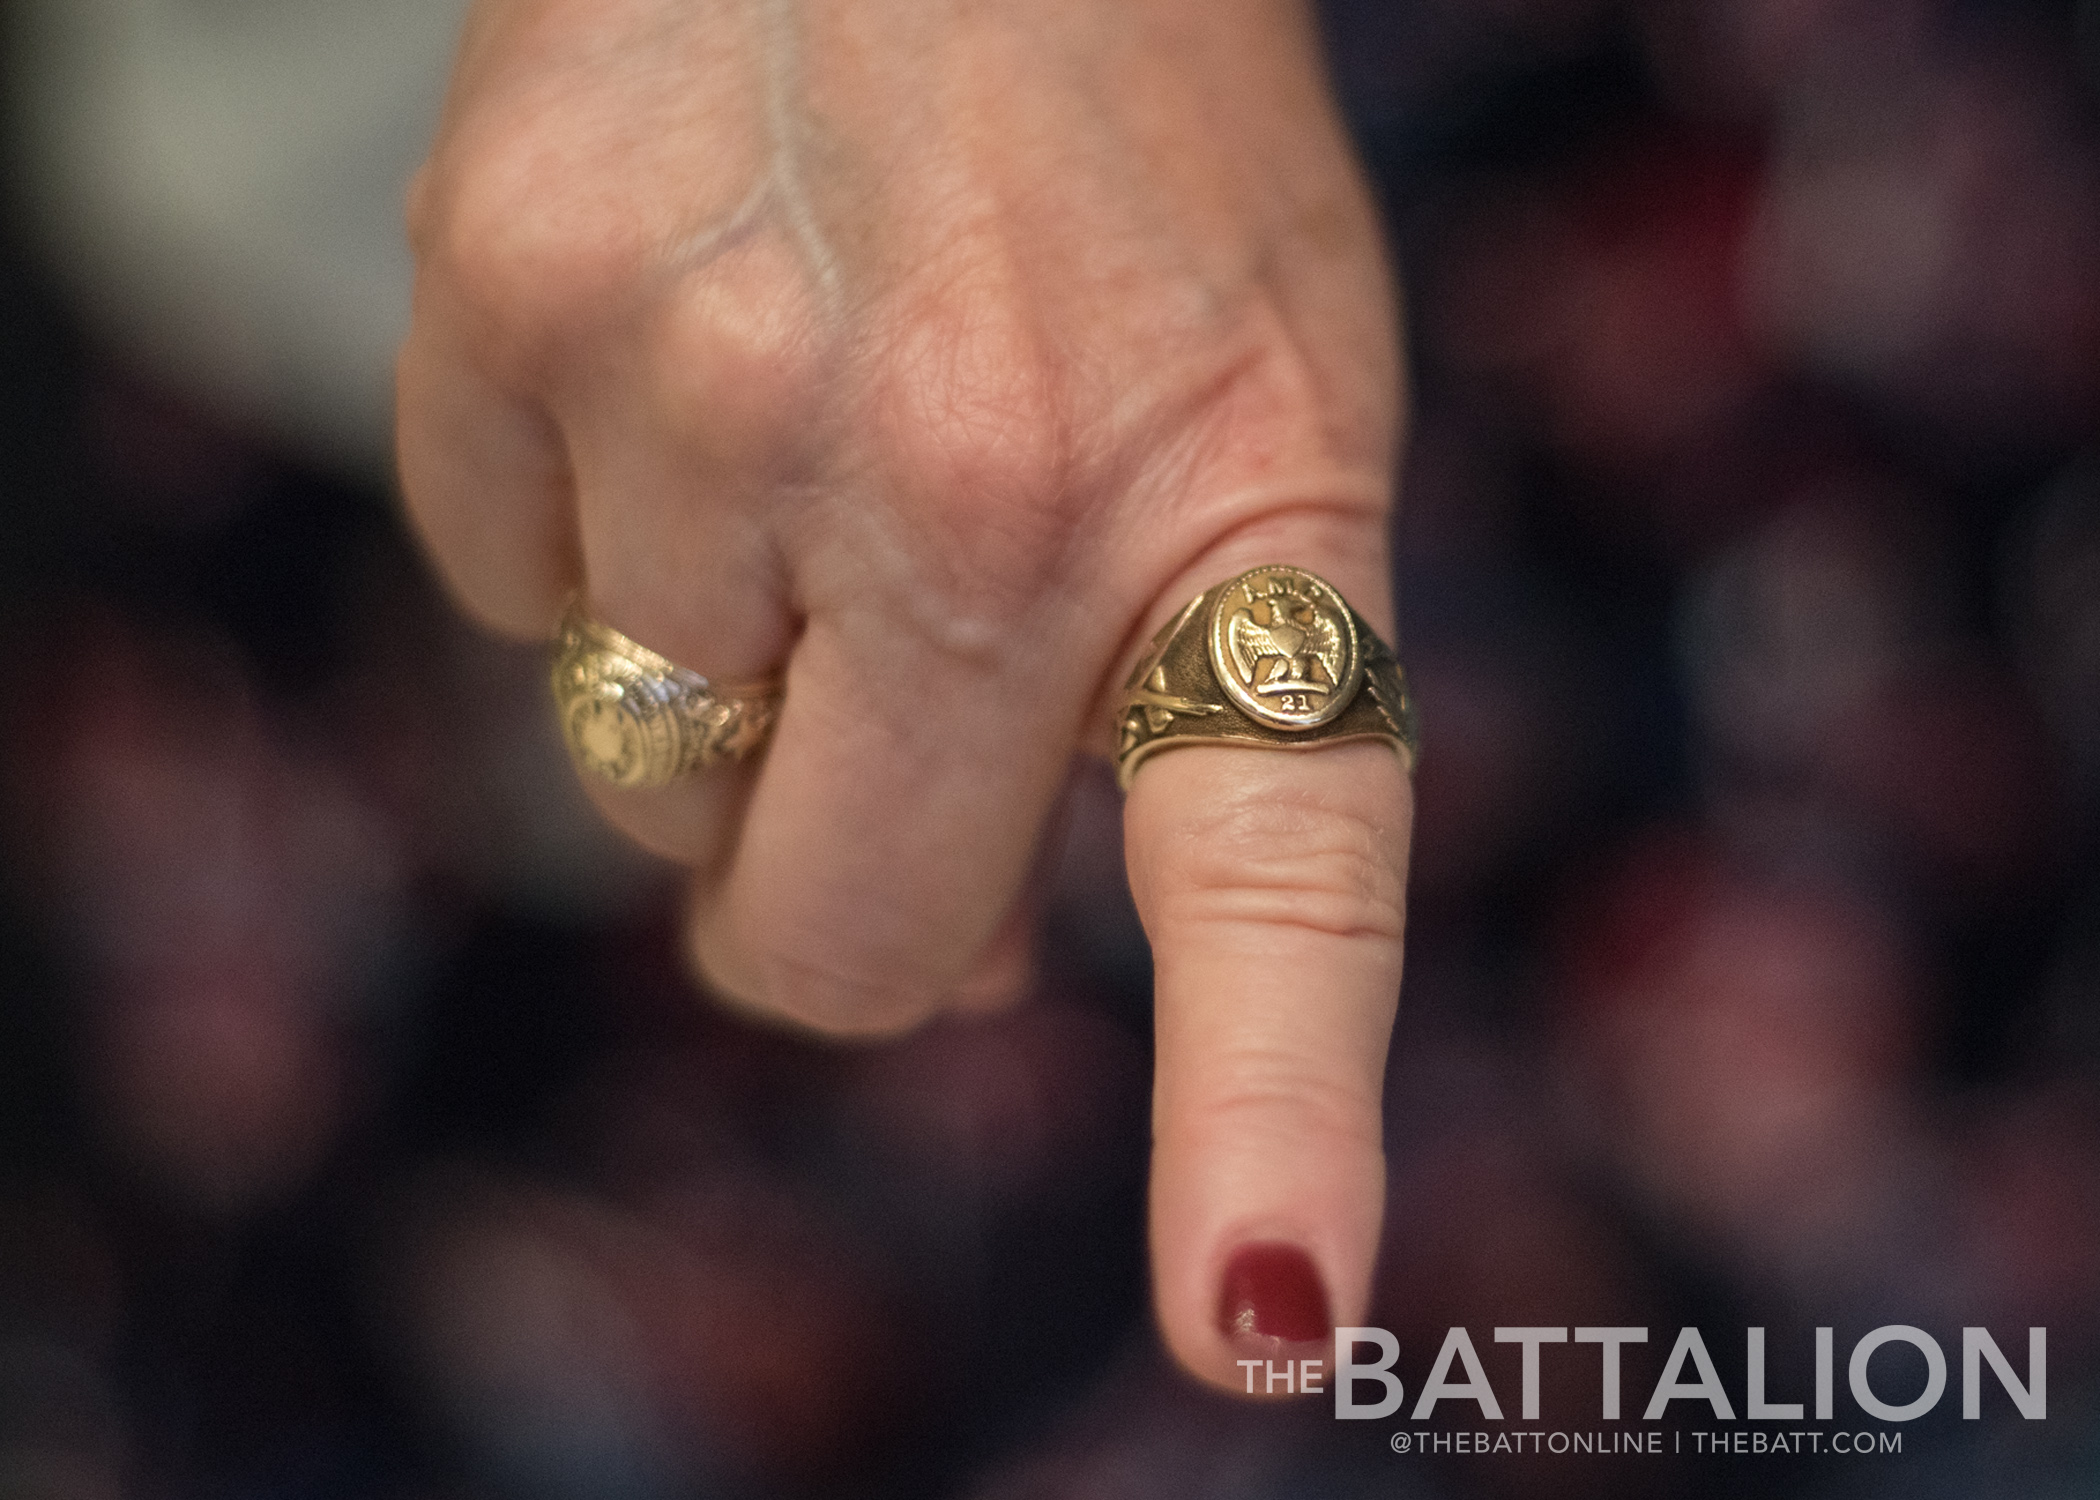 Aggie+Ring+Day